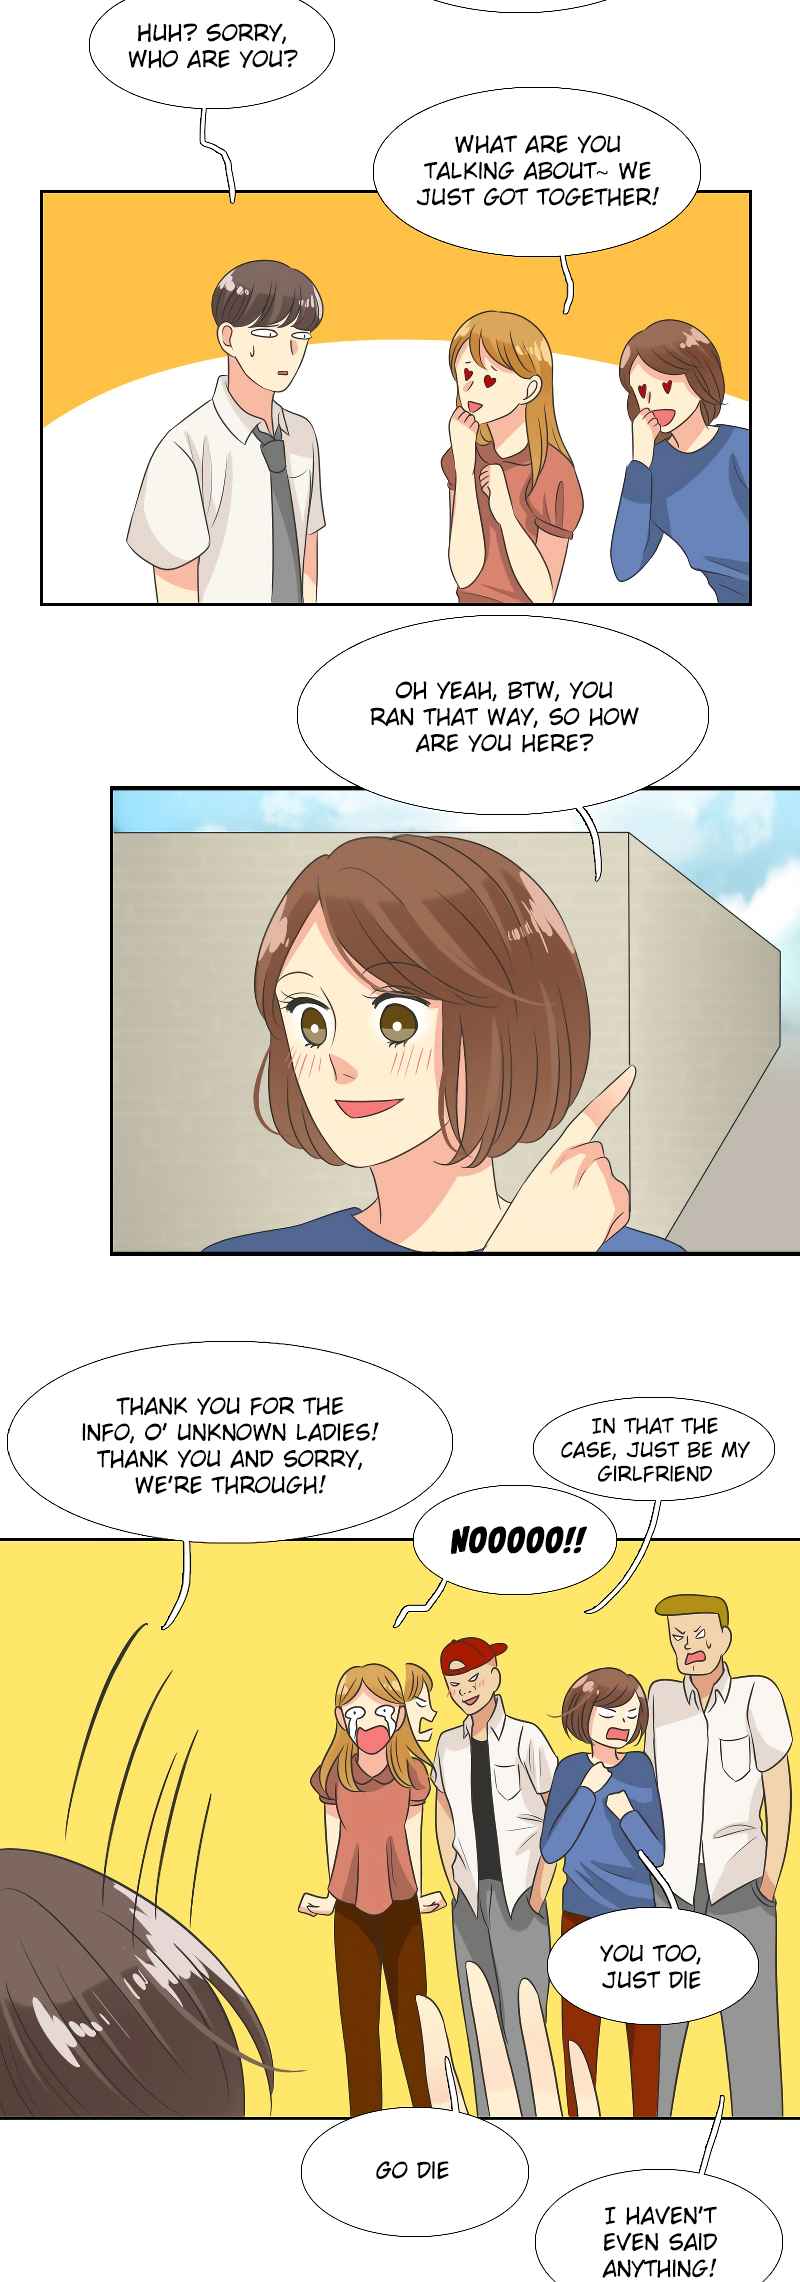 Terlalu Tampan Ch. 33 What It Feels Like to be Handsome (3)